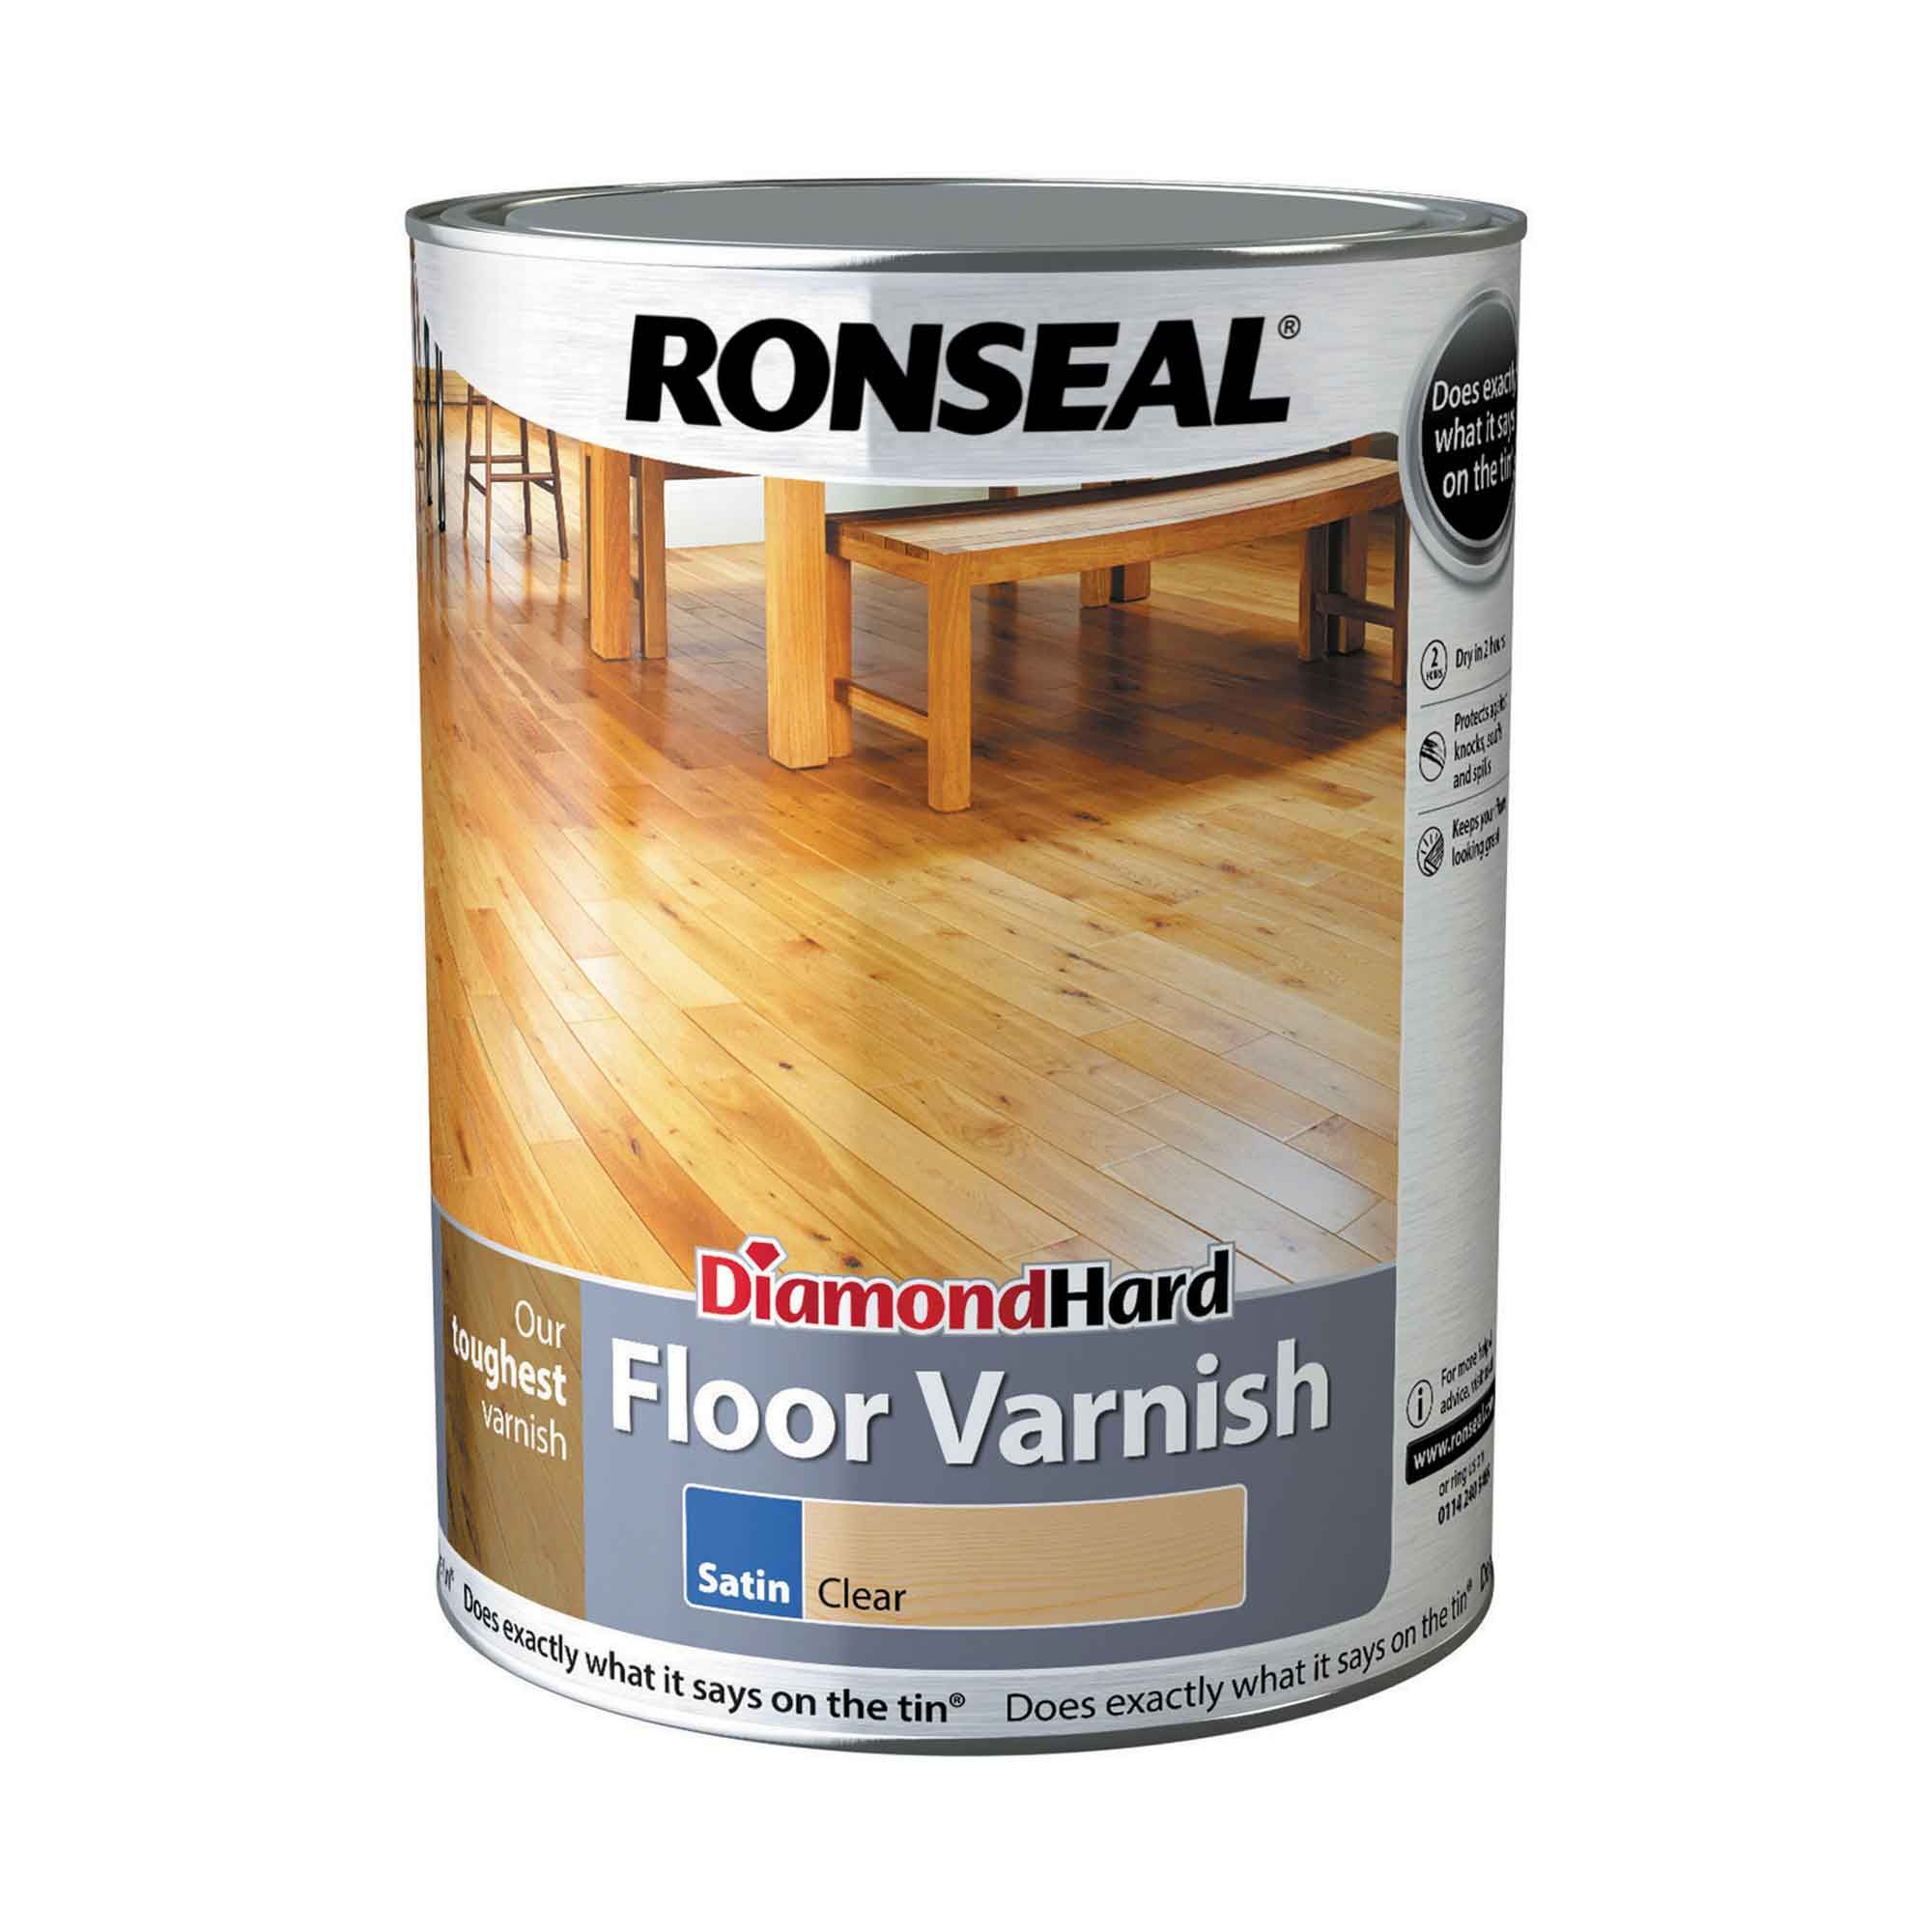 How to restore a wooden table to its former glory with Ronseal Interior wax.